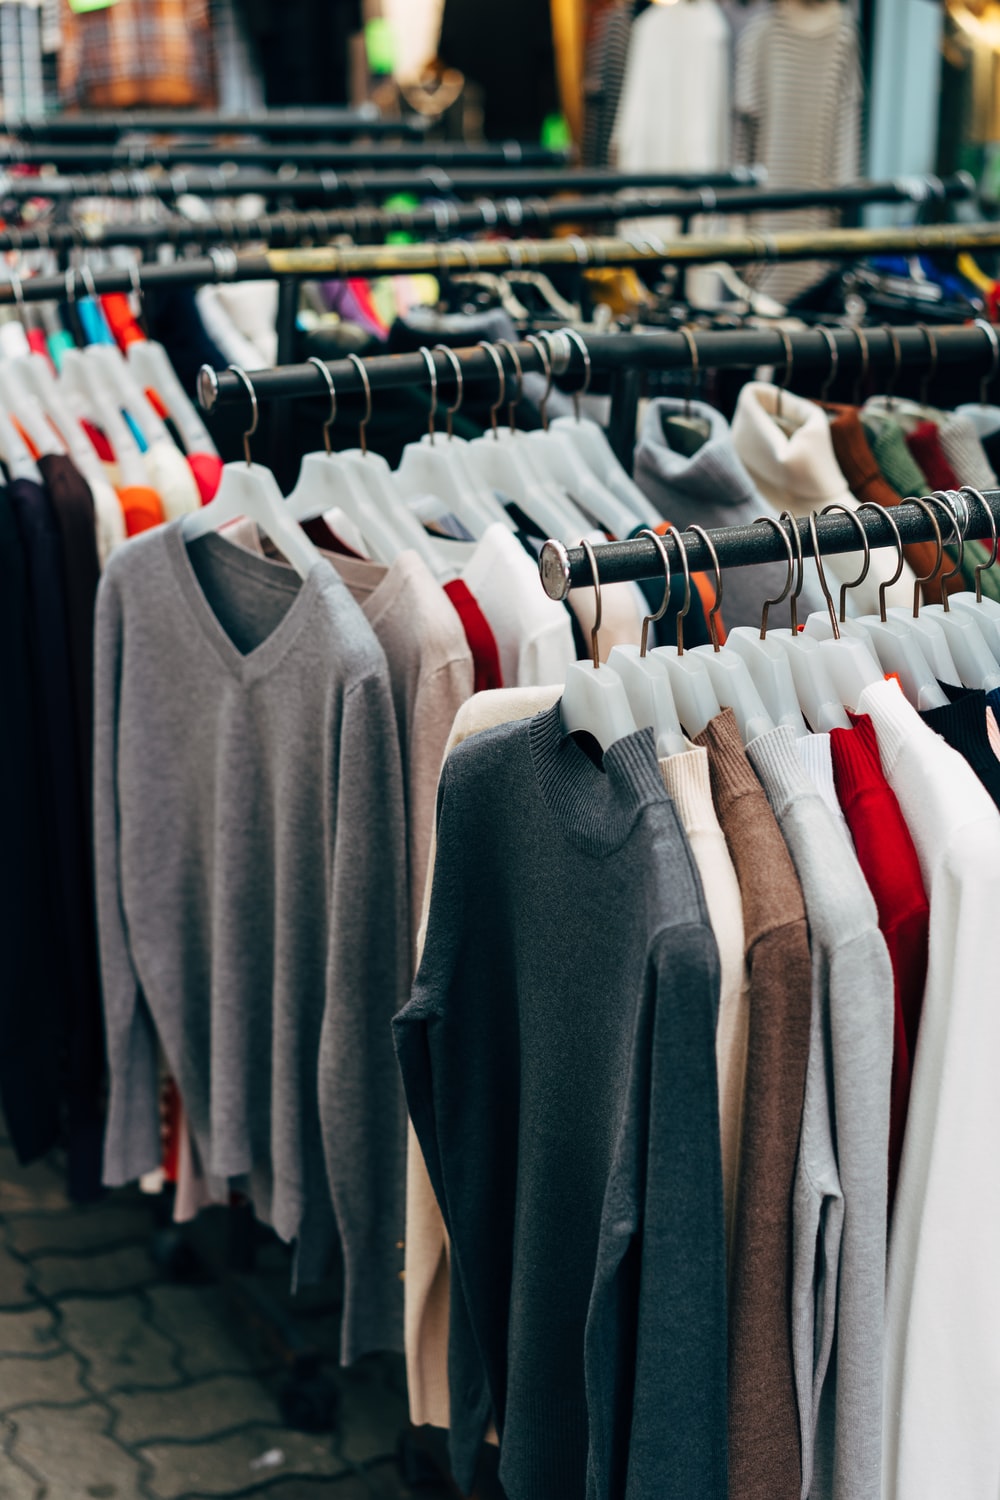 Clothing Store Picture. Download Free Image